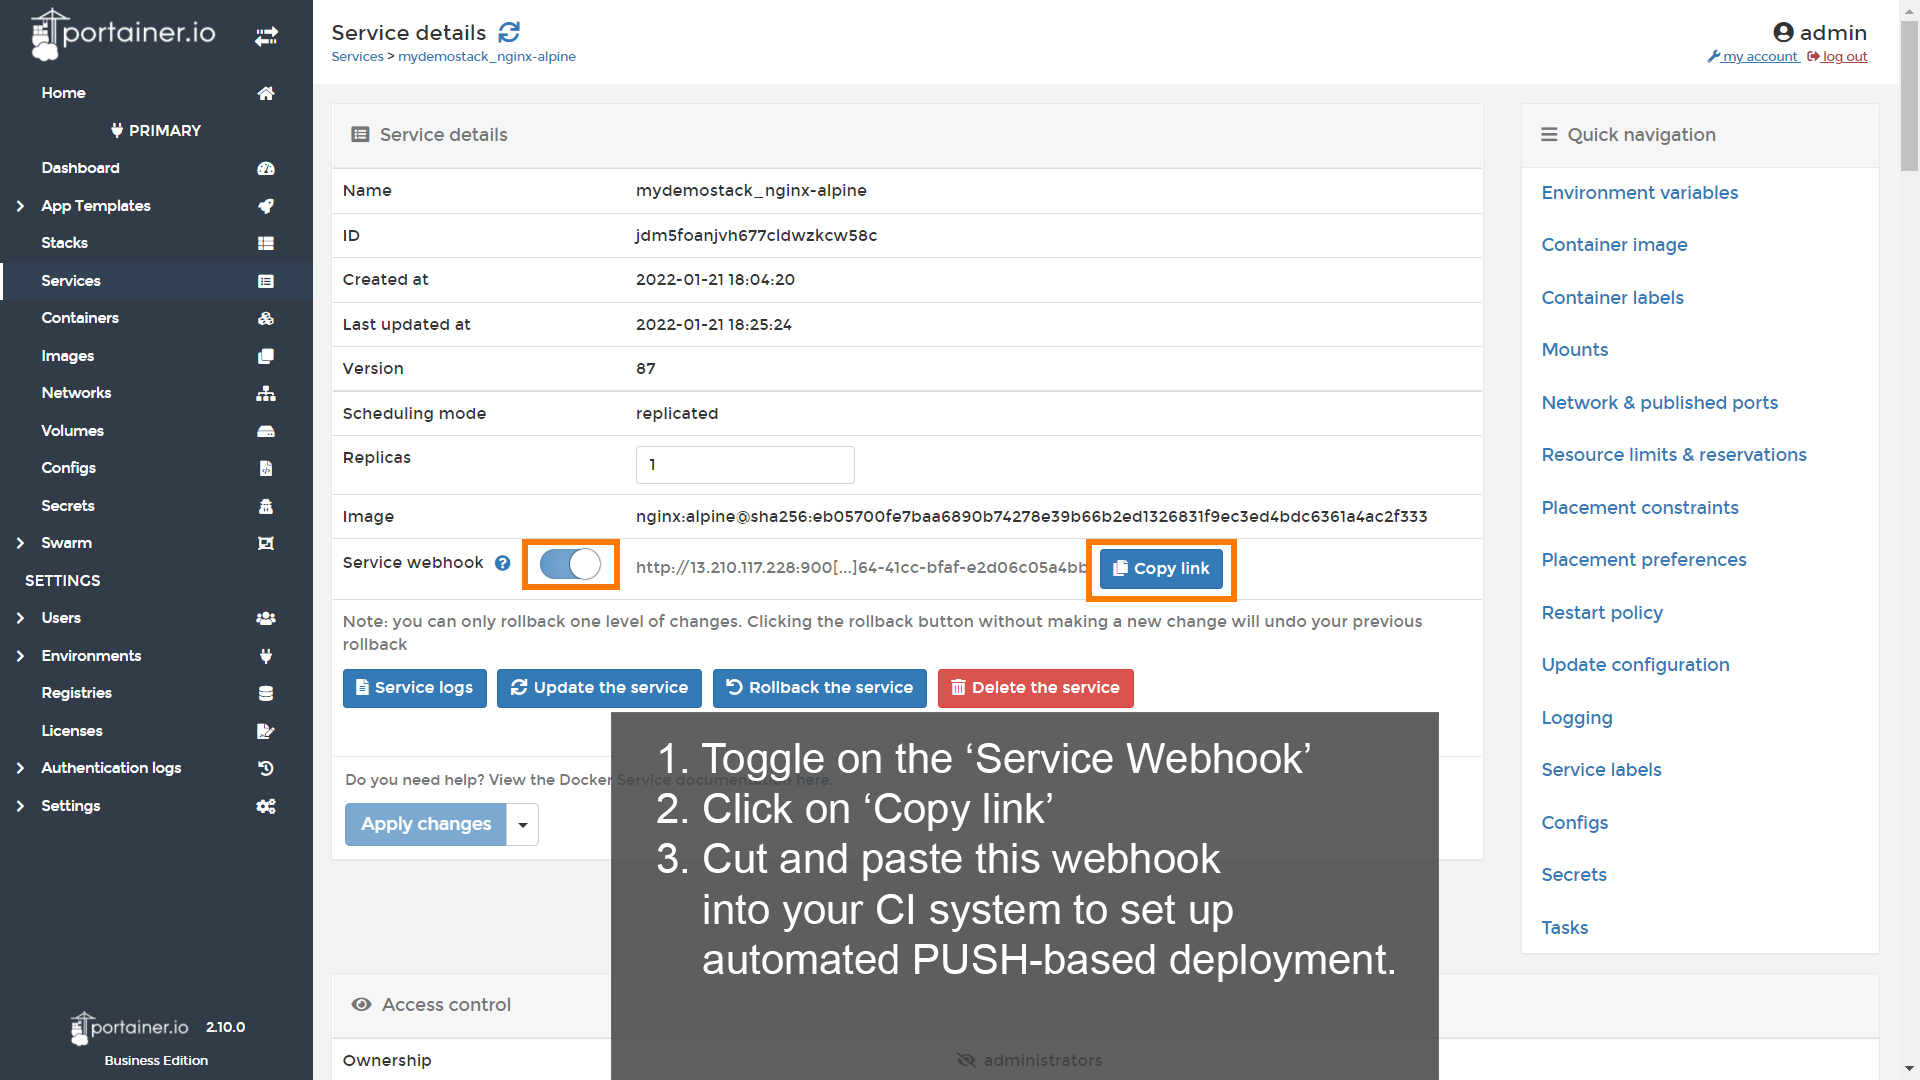 Turn on the service webhook and copy the generated link